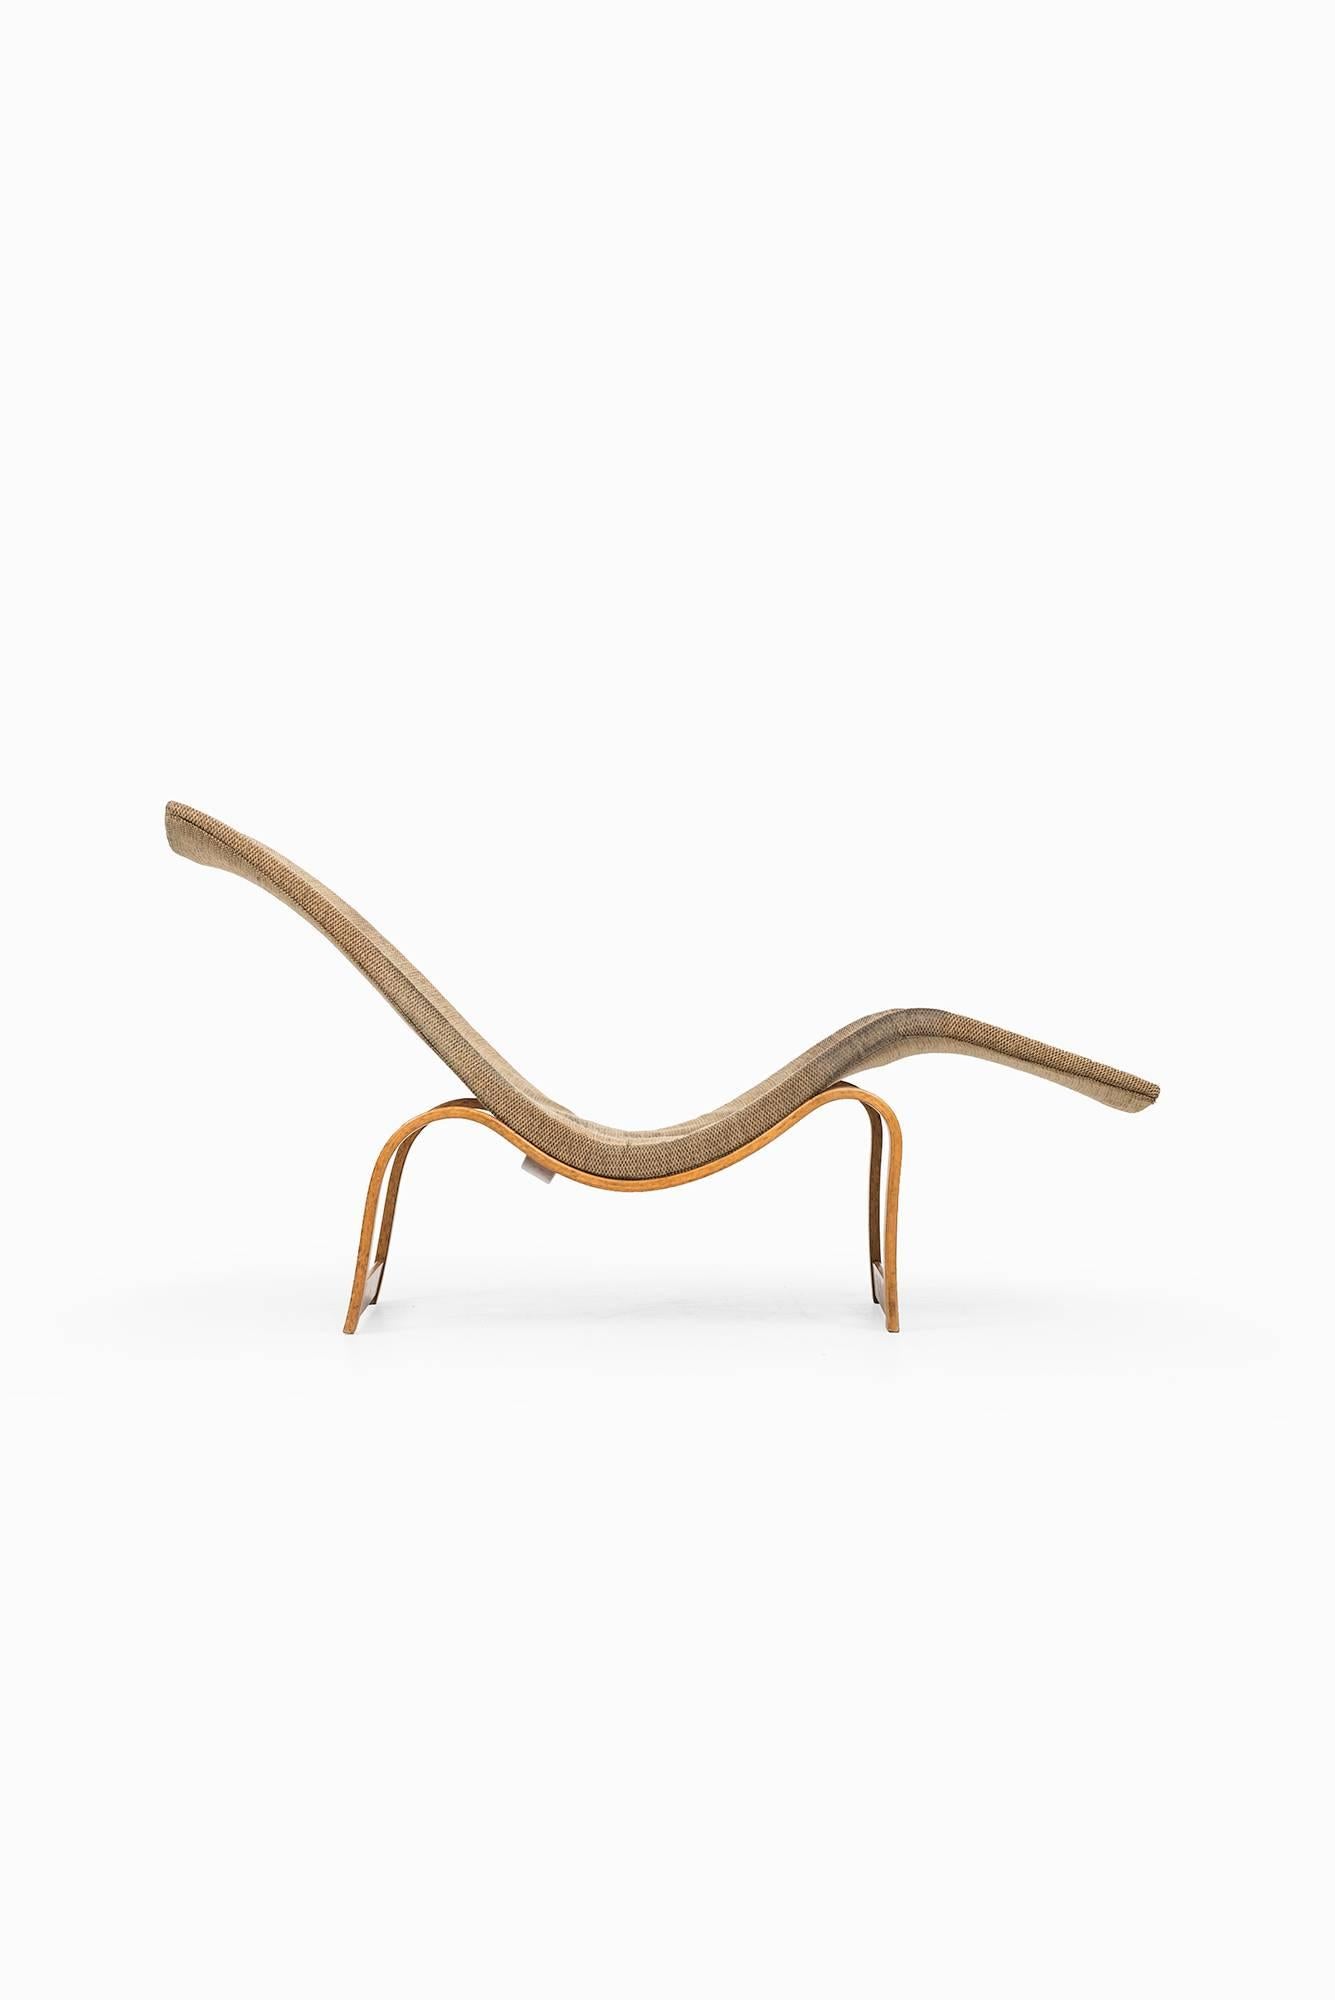 Very rare and early lounge chair model 36 designed by Bruno Mathsson. Produced in Karl Mathsson in Värnamo, Sweden.